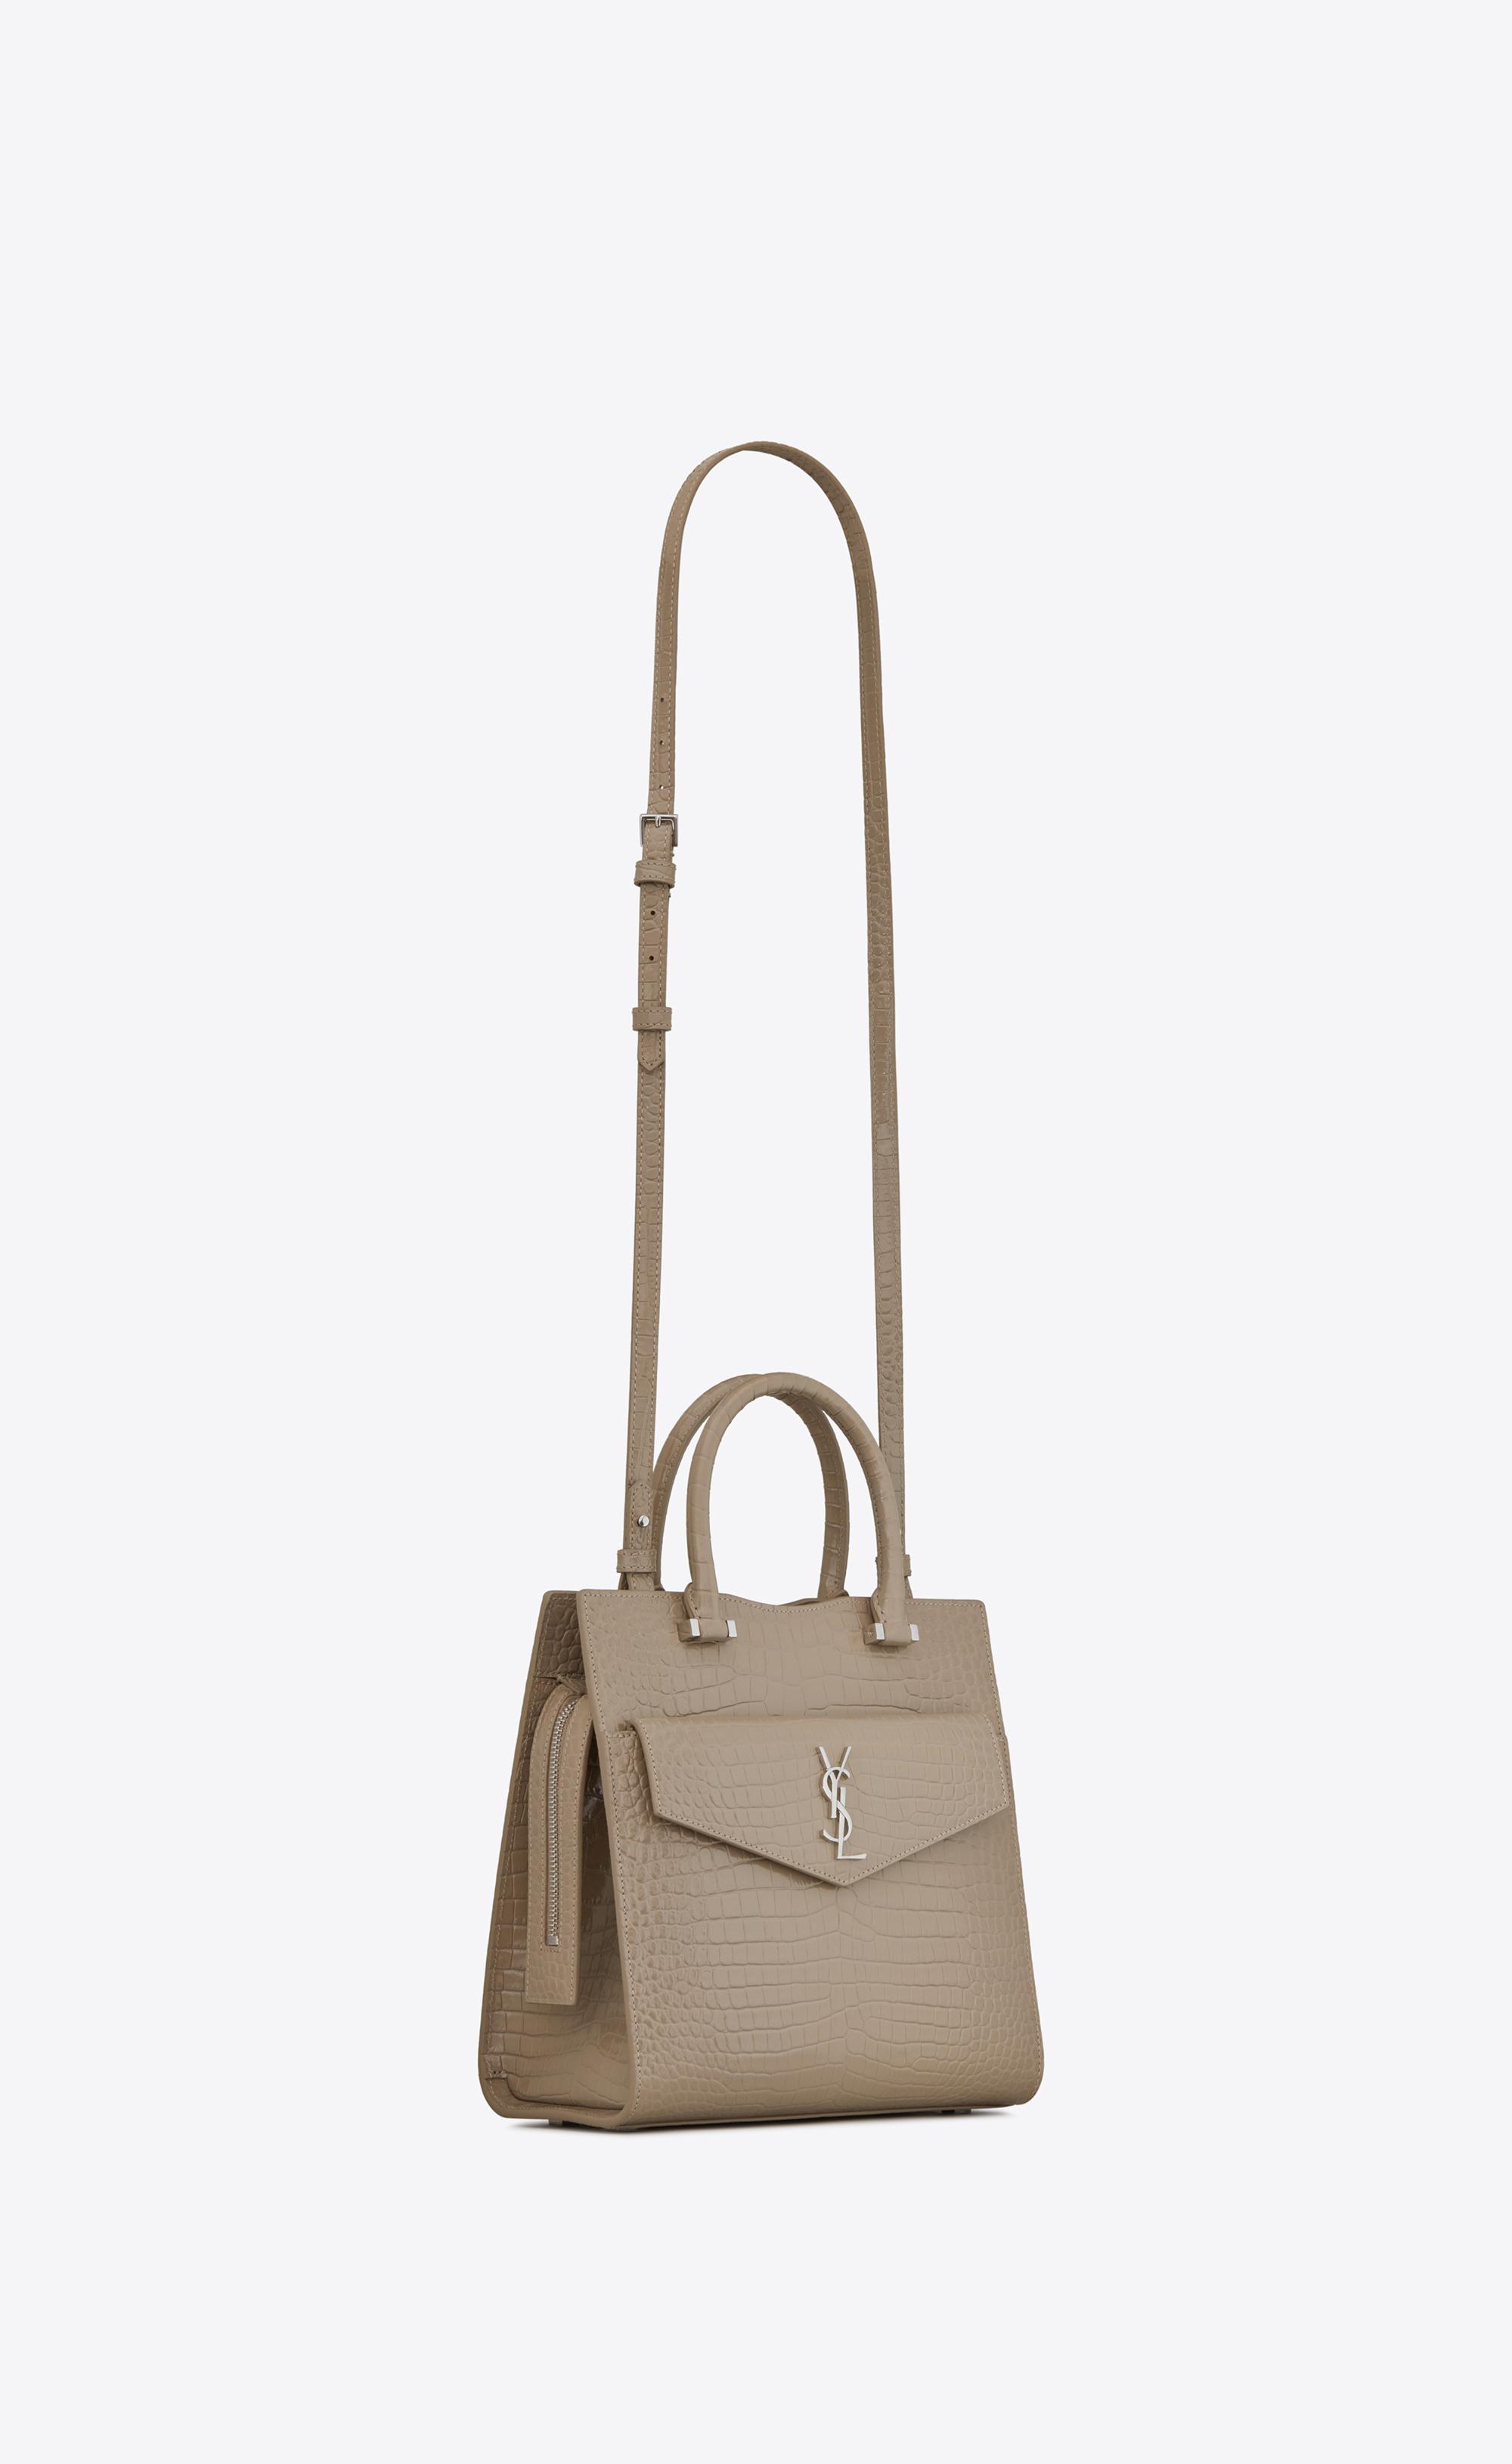 SAINT LAURENT Uptown Small Leather Tote Bag